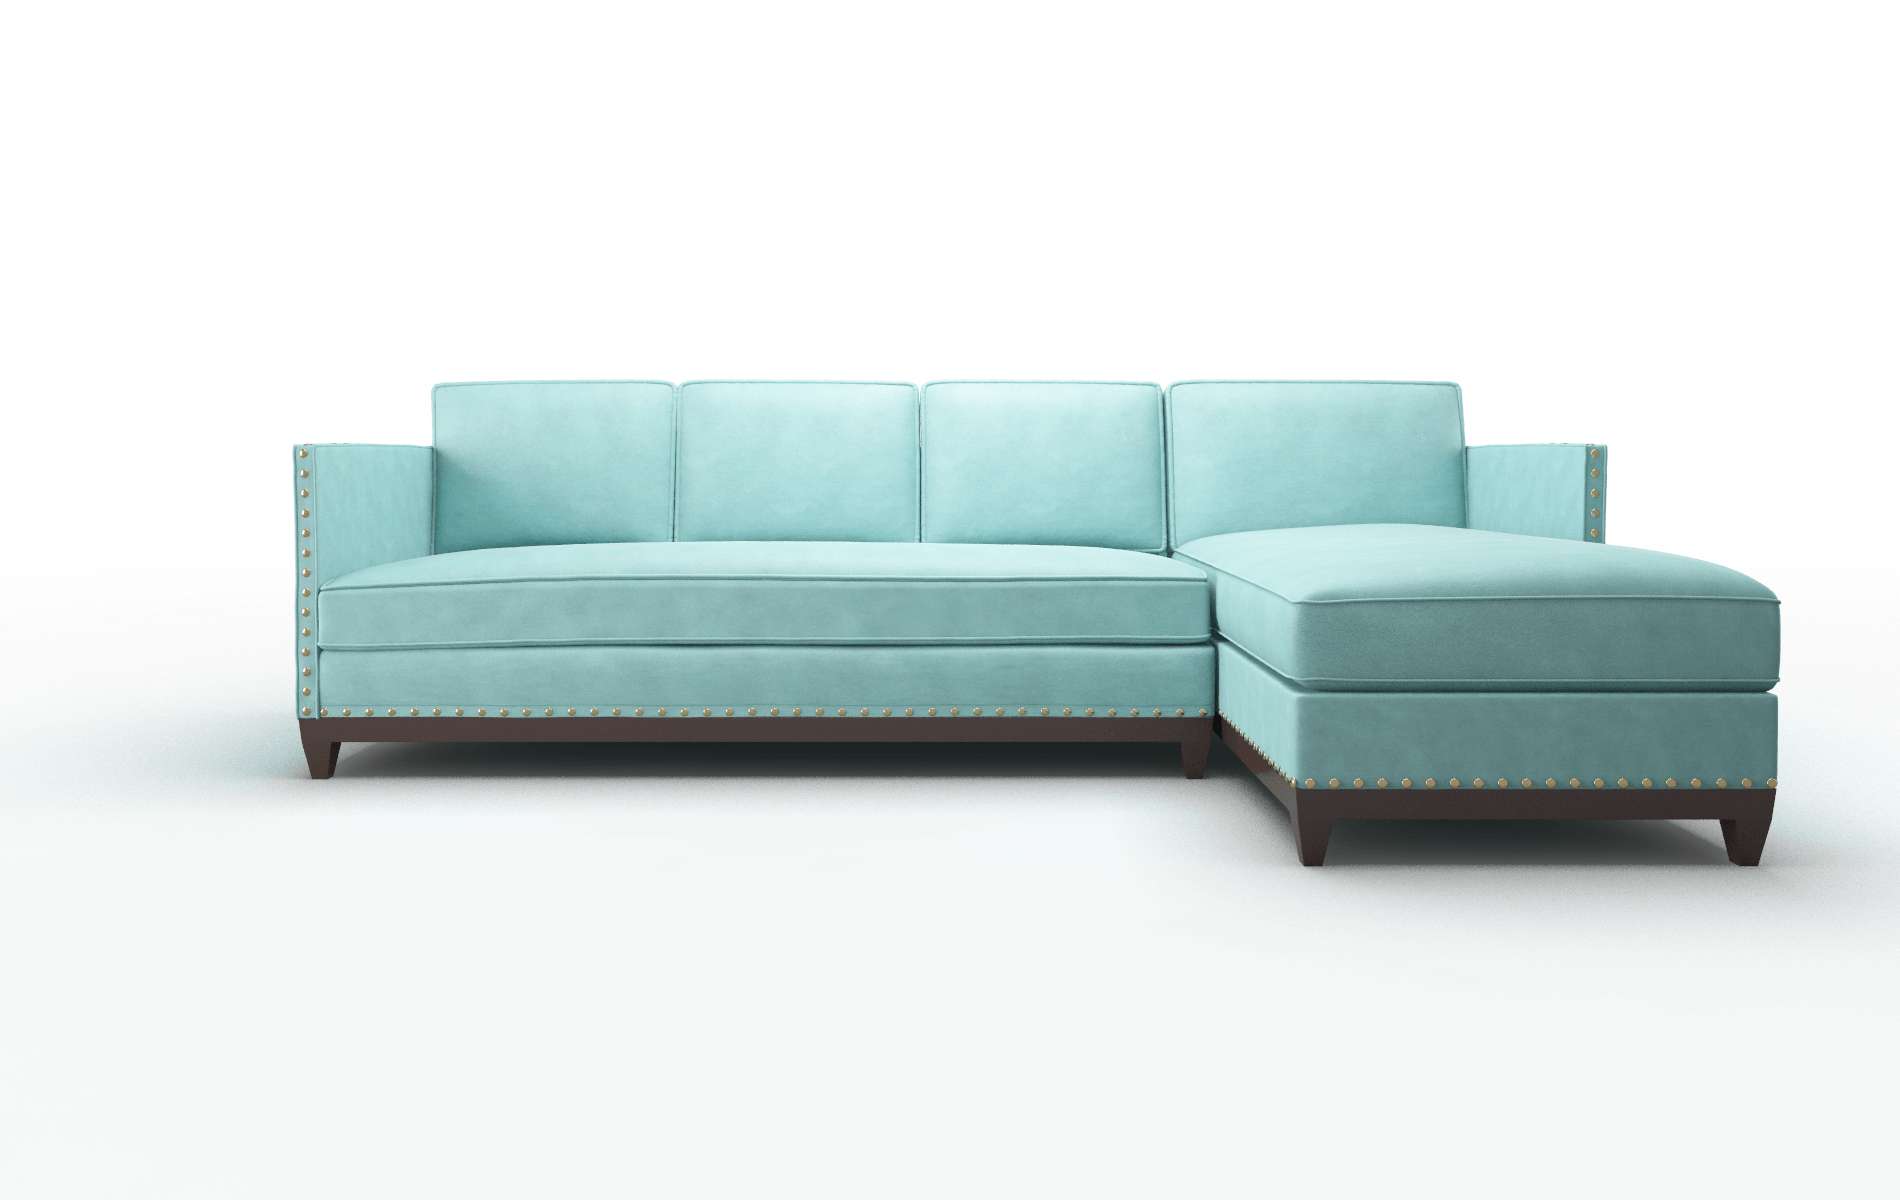 Florence Curious Turquoise chair espresso legs